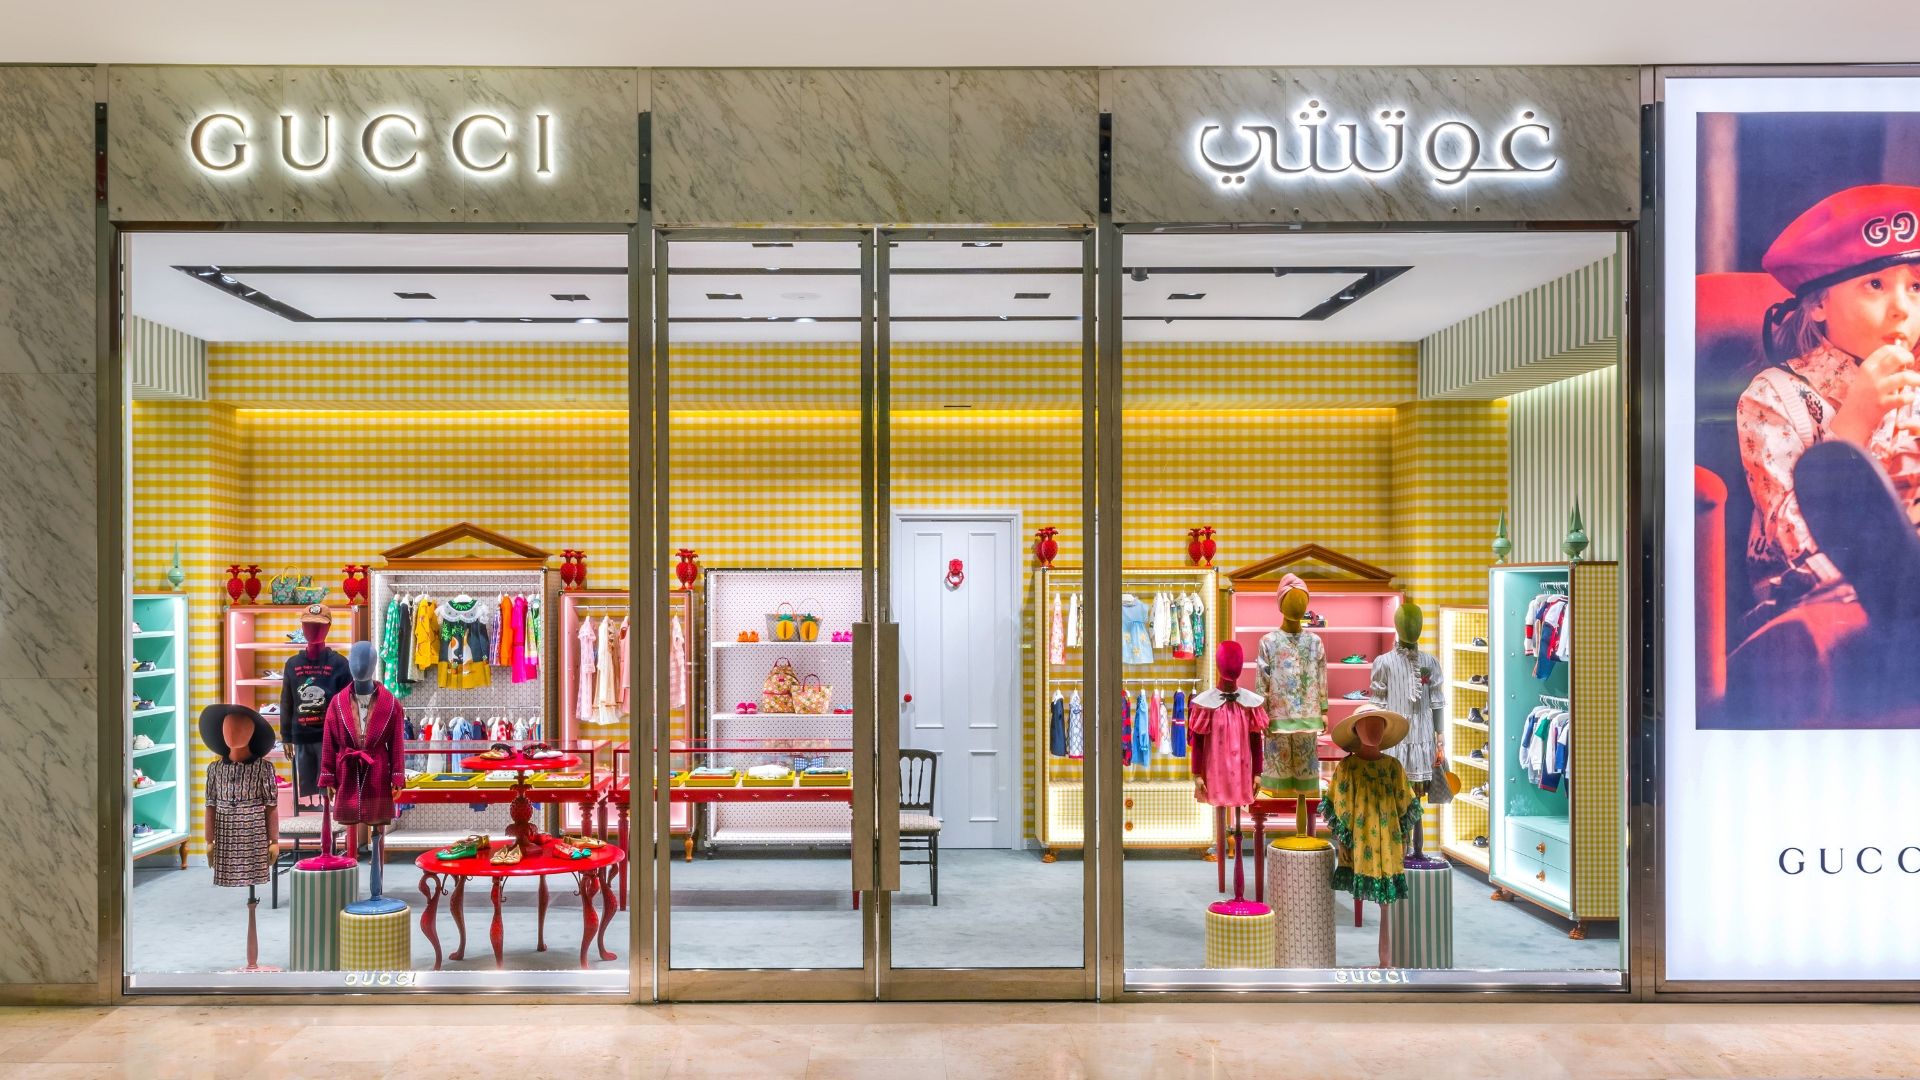 First Gucci kids store in the world opens in Kuwait – 2:48AM